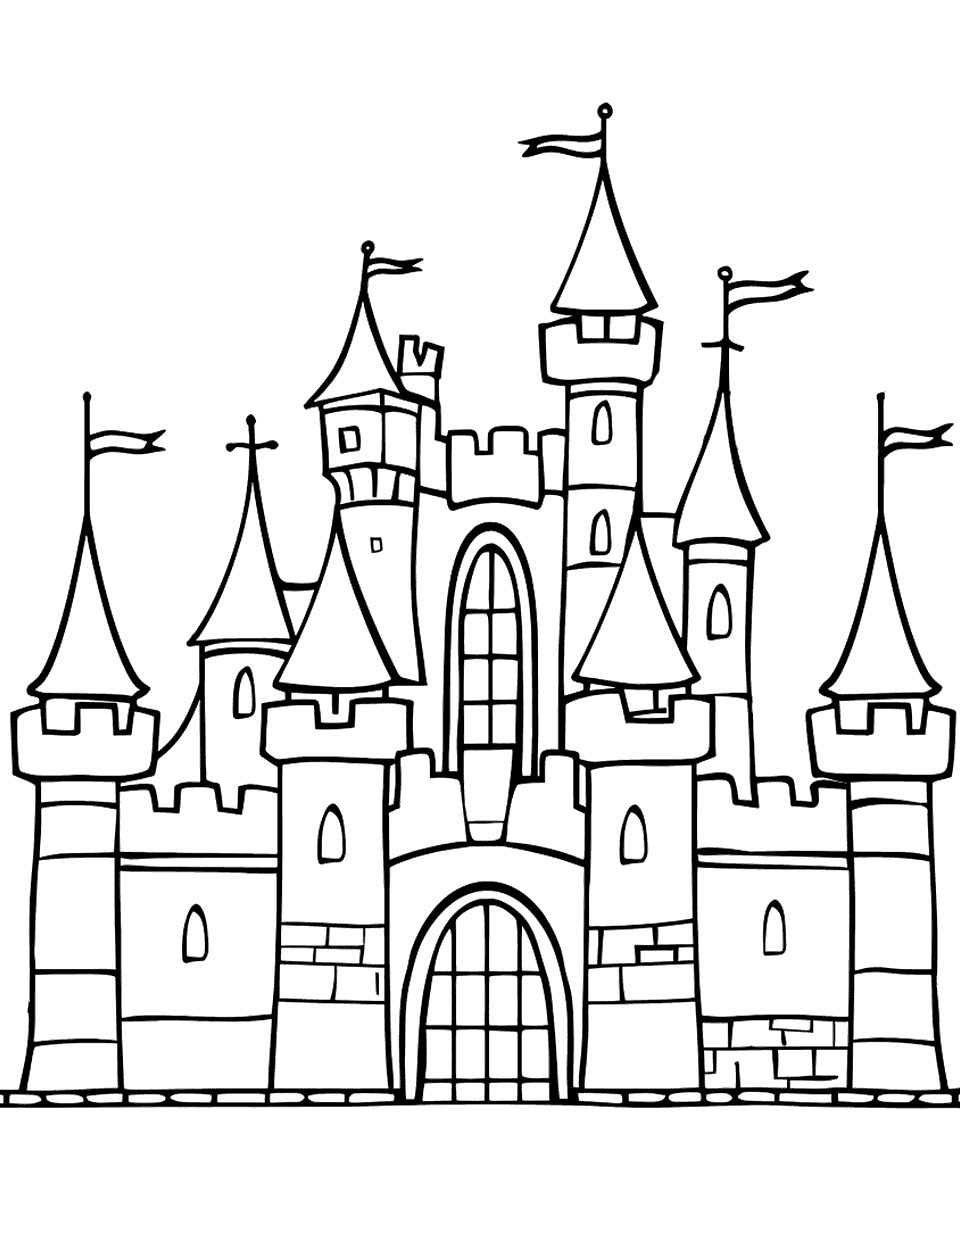 Simple Castle Outline Coloring Page - A basic outline of a castle with large, easy-to-color sections suitable for preschoolers.